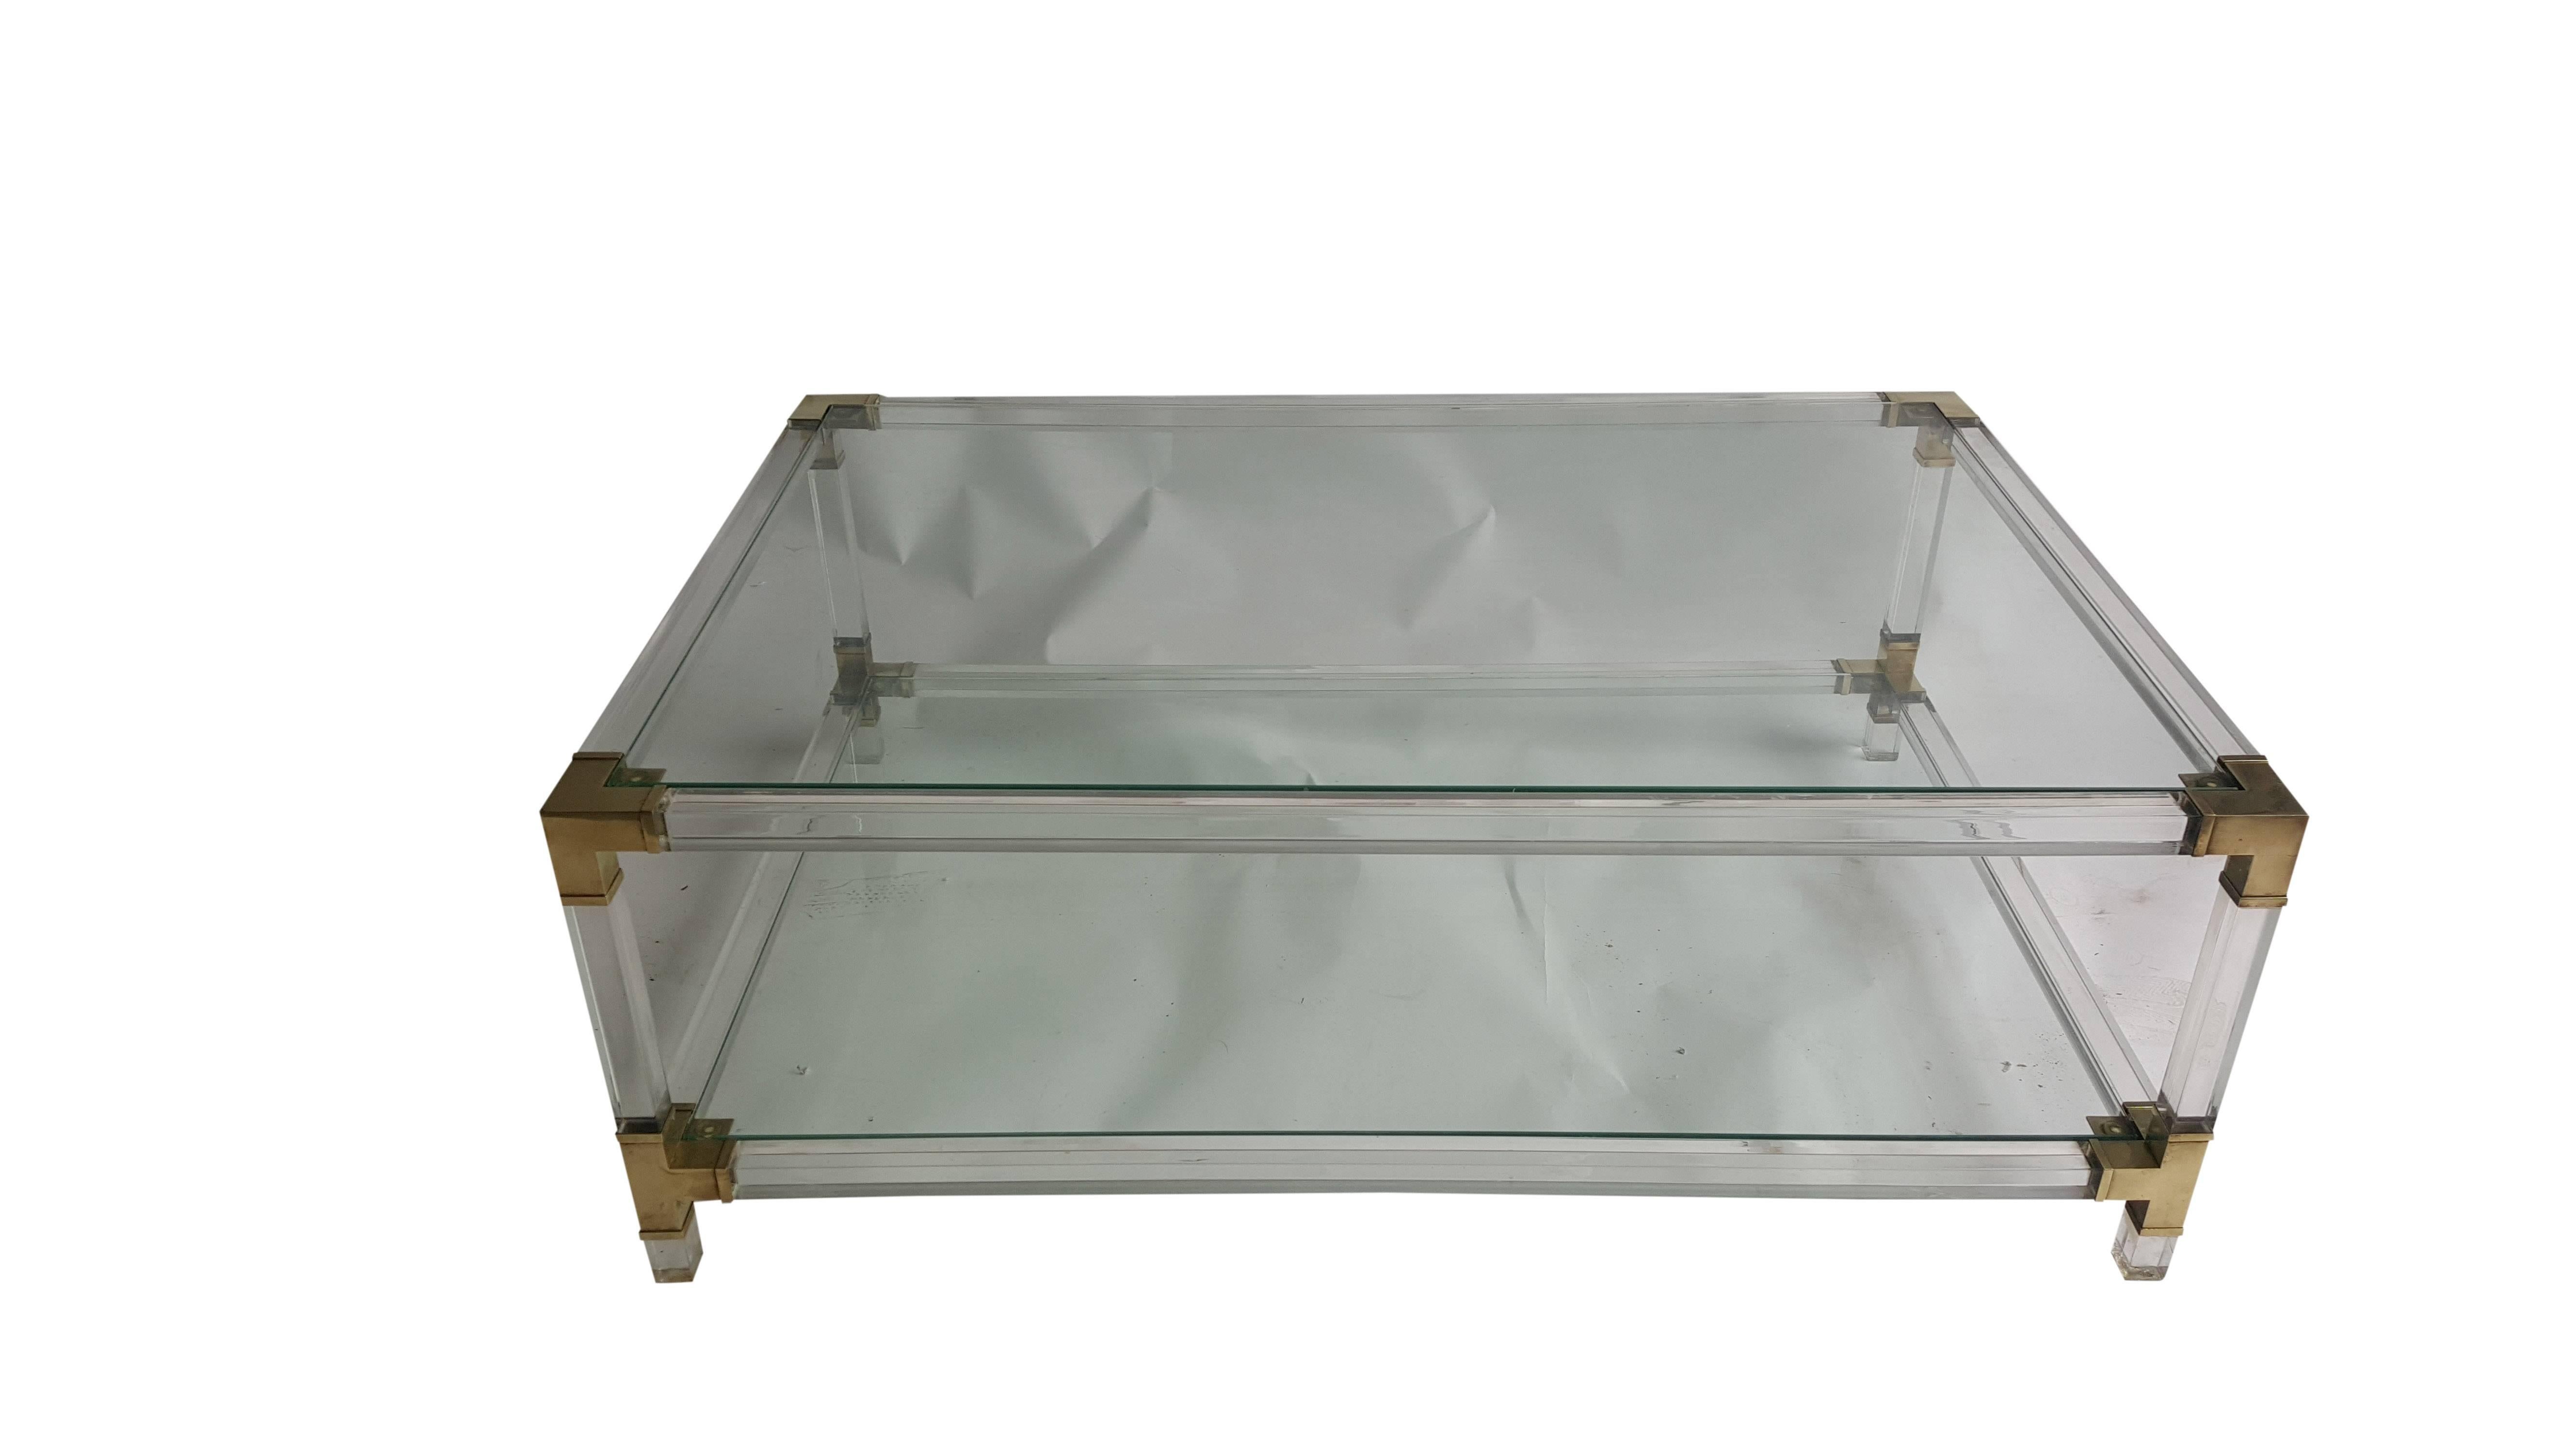 An amazing coffee table!
This table has four poles that are supporting tabletop and shelf on the bottom.
Each pole has decorative brass element on top and bottom.
Coffee table is made out of thick plexiglass.

Condition is excellent!

Stylish